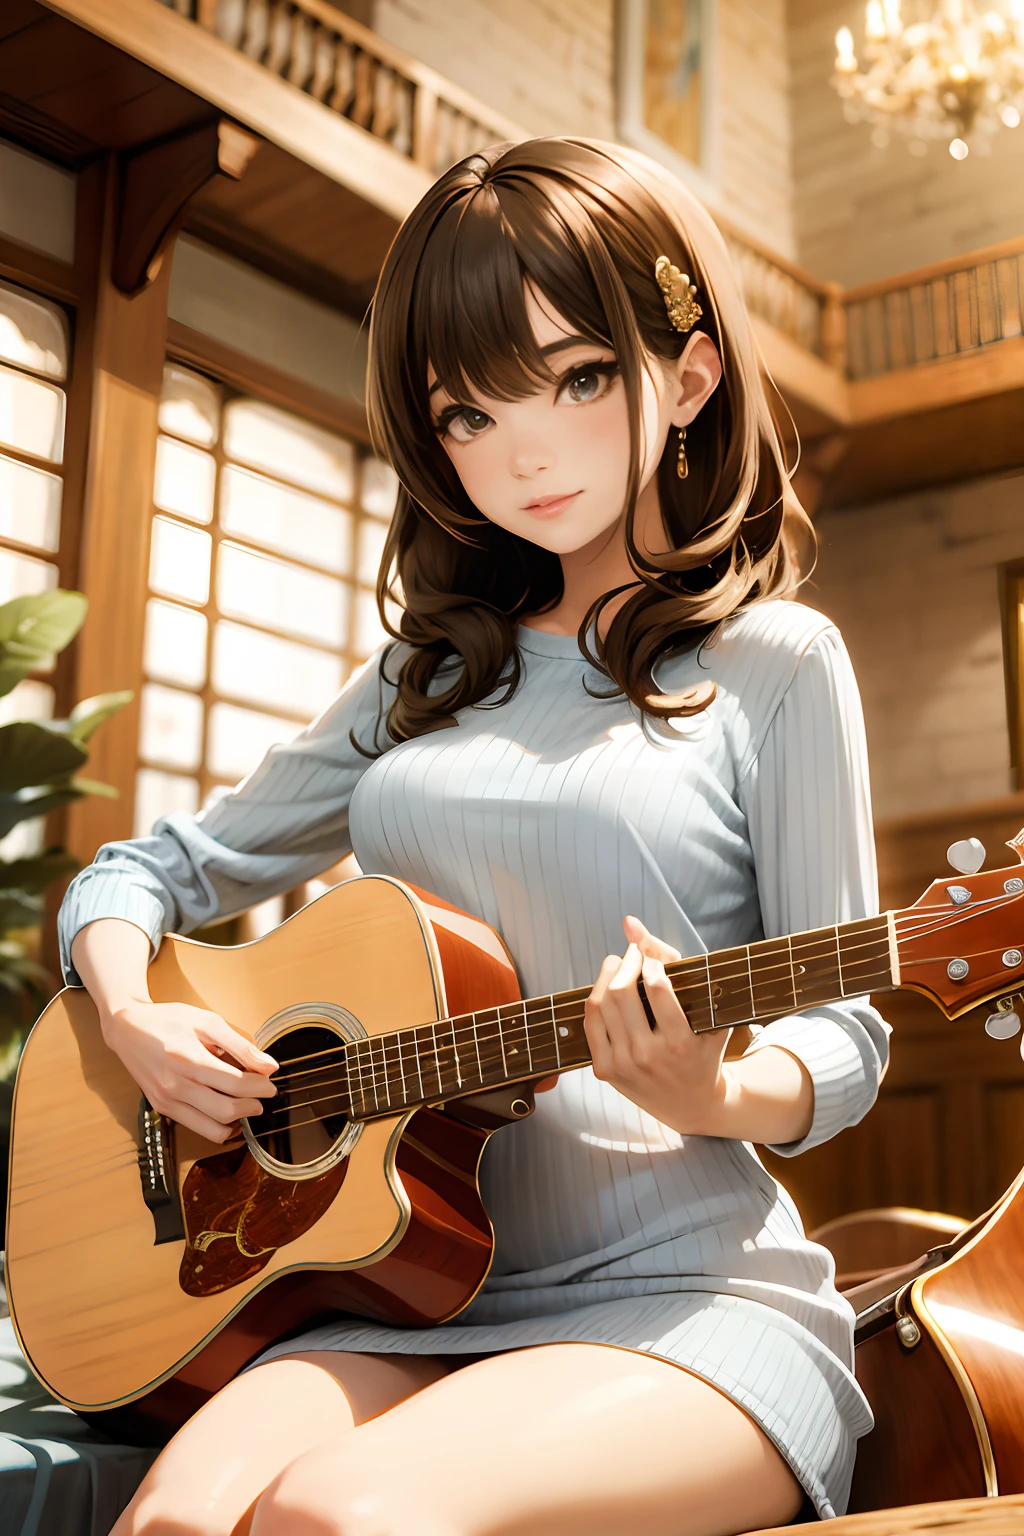 A girl playing guitar in an orchestra hall, creating a masterpiece. The artwork showcases the best quality with stunning details in an 8k resolution. The flute is the center of attention, intricately designed to capture every detail, from the delicate keys to the smooth curves. The girl's fingers gracefully move along the instrument, producing enchanting melodies that fill the grand hall. The scene is bathed in soft, warm lighting, enhancing the ambiance and creating a sense of awe. The art style is realistic, capturing the girl's expression and the intricate details of her face, especially her beautiful, focused eyes and lips. The background features other musicians playing their instruments, adding depth and immersing the viewers in the orchestra's mesmerizing performance. The colors are vivid and harmonious, painting a vibrant picture of the musical experience. The artwork evokes a sense of tranquility, inviting the viewers to immerse themselves in the magic of music through the girl and her flute.